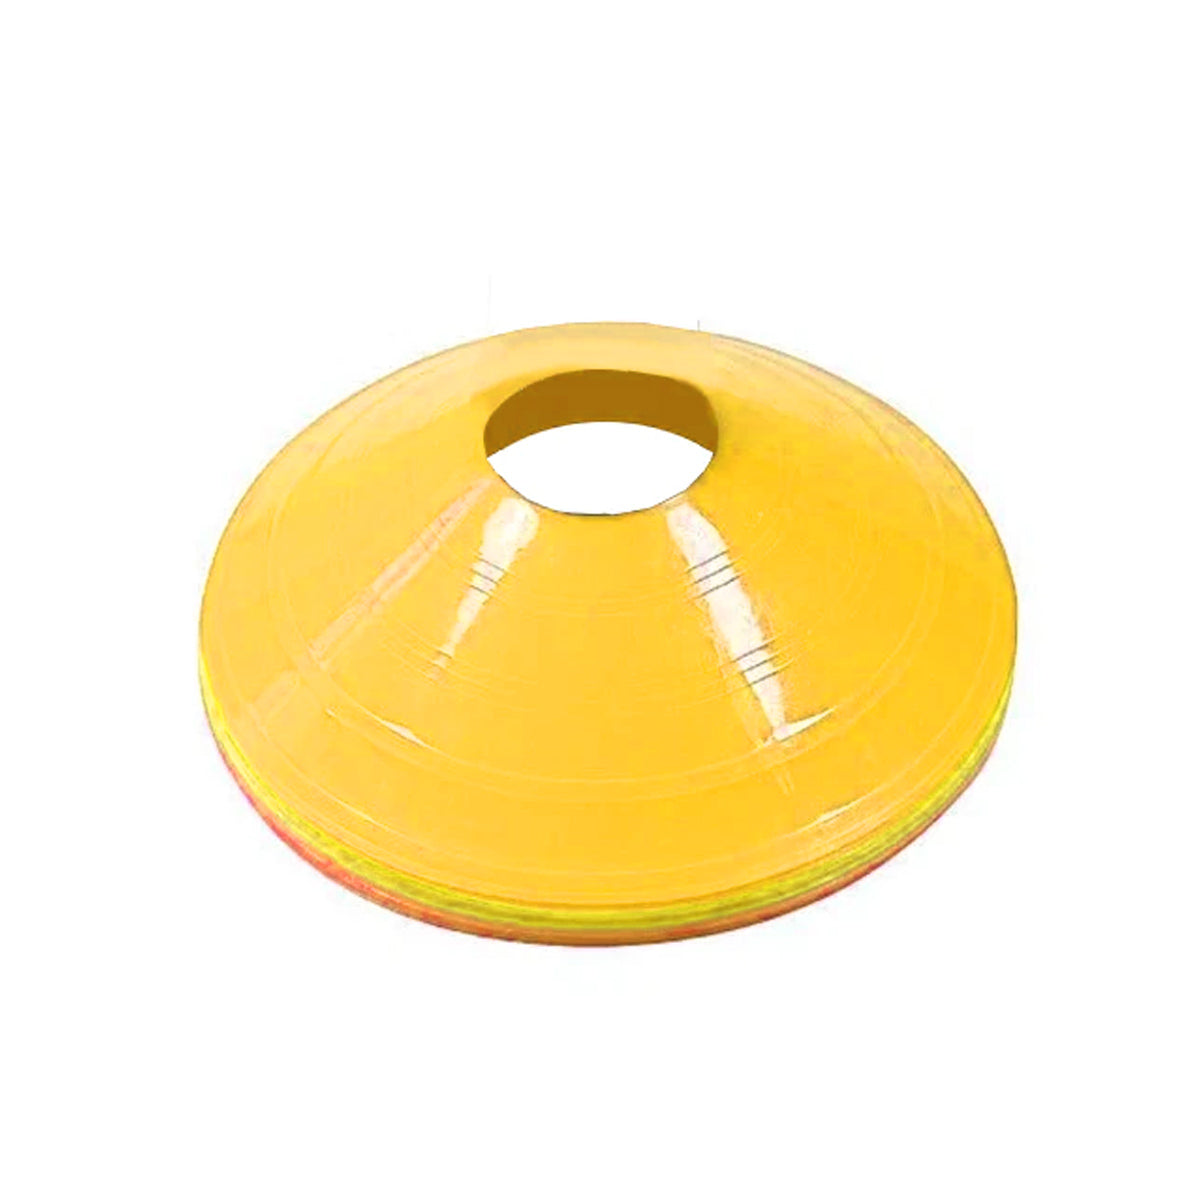 Field Marker Dome - 10 Pack